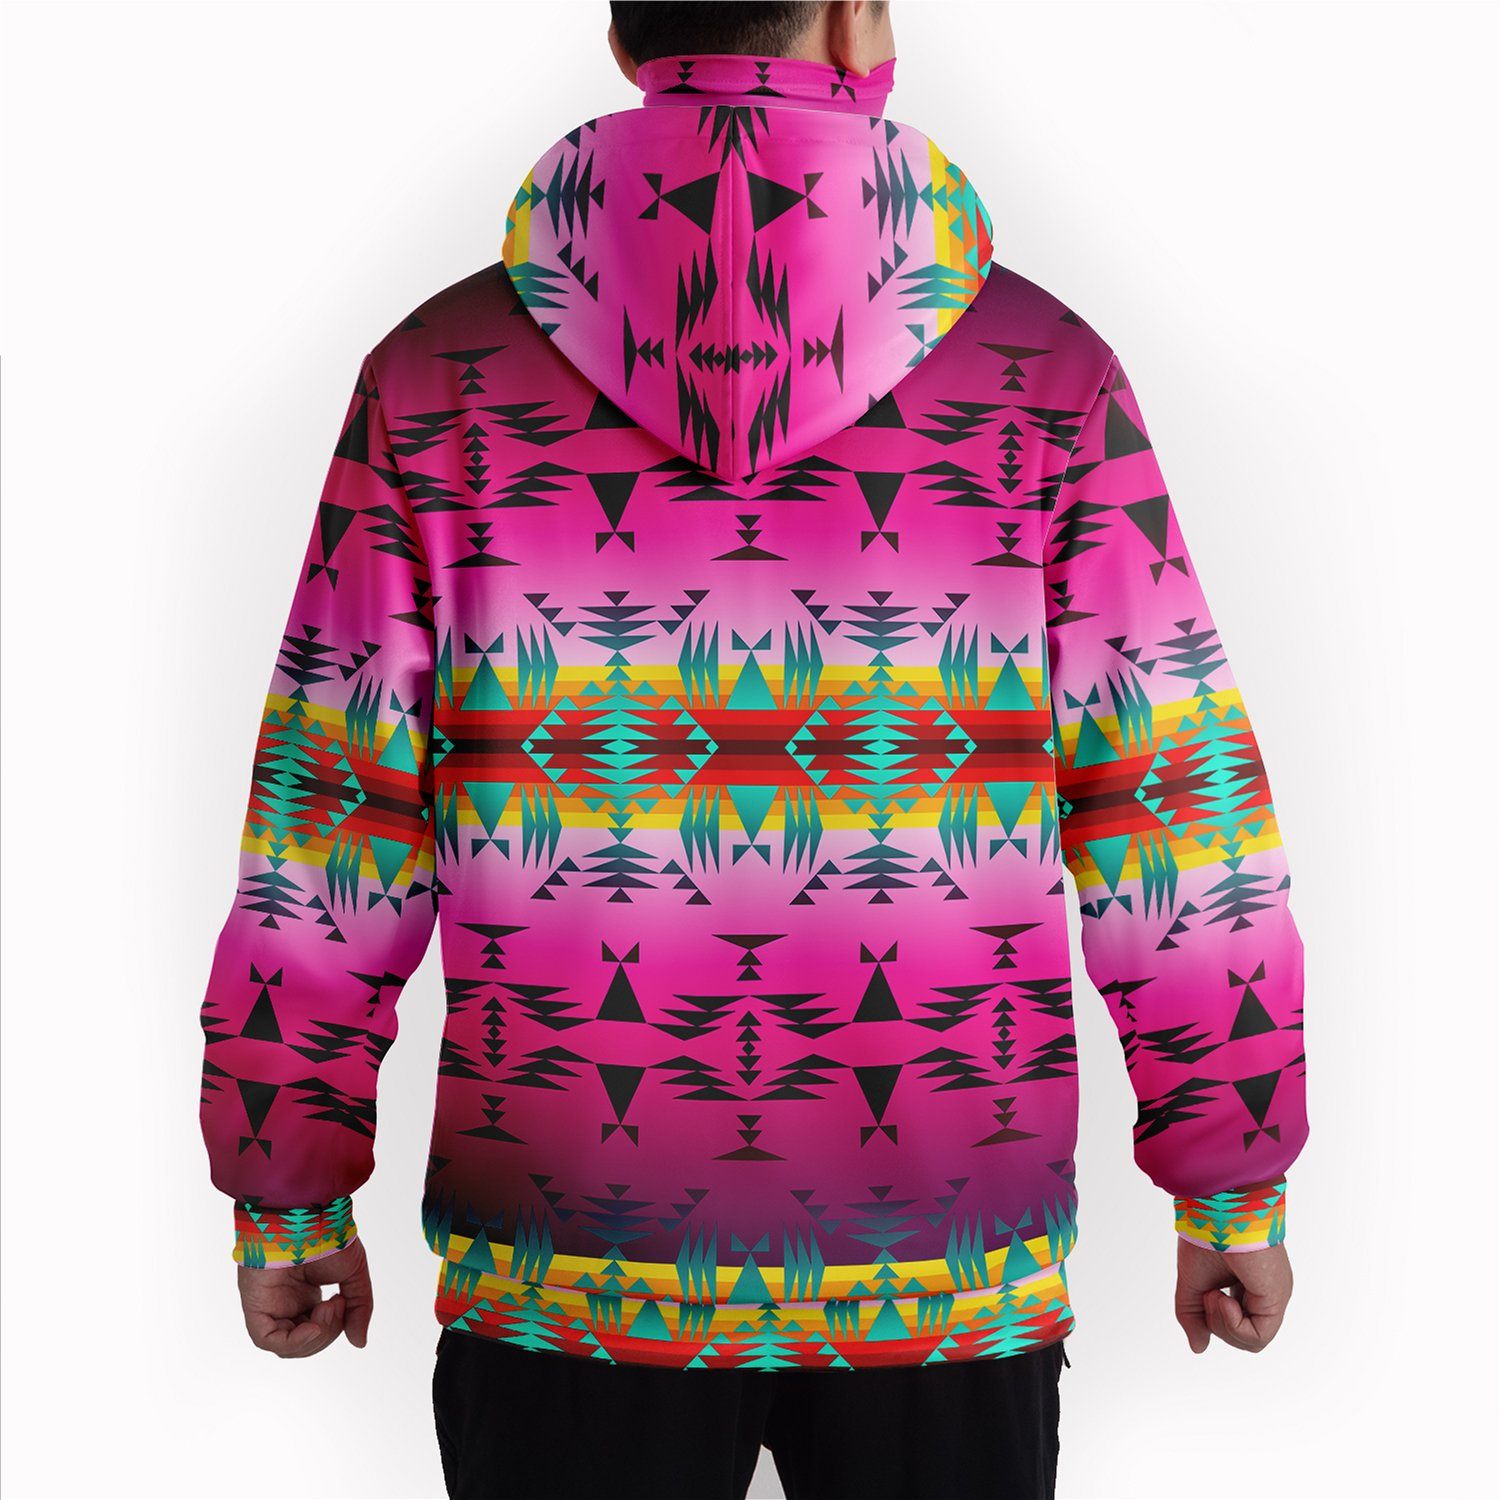 Between the Cascades Mountains Hoodie with Face Cover 49 Dzine 